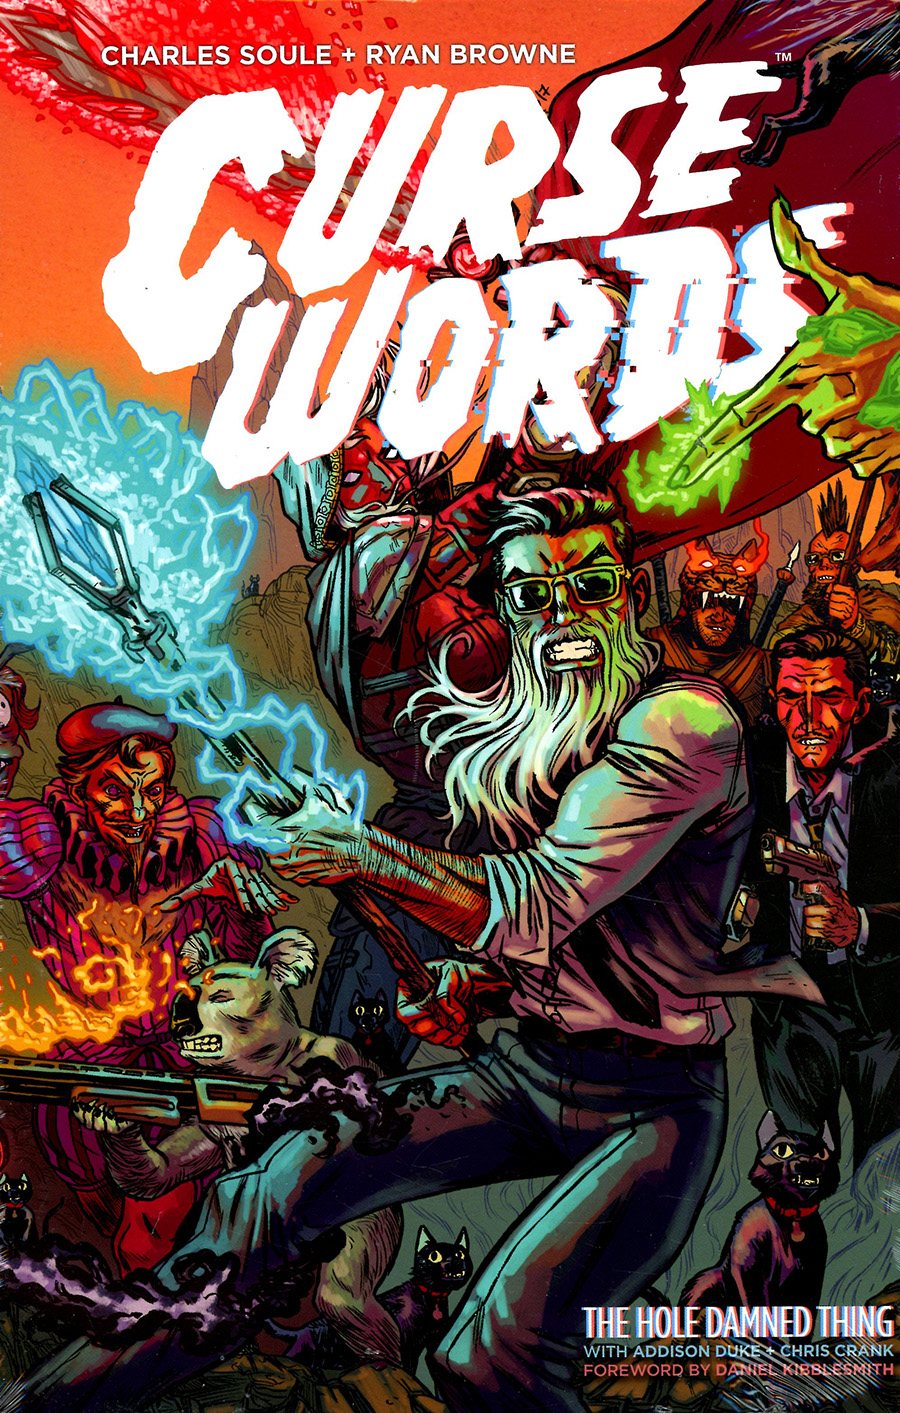 Curse Words The Hole Damned Thing Omnibus HC Regular Edition